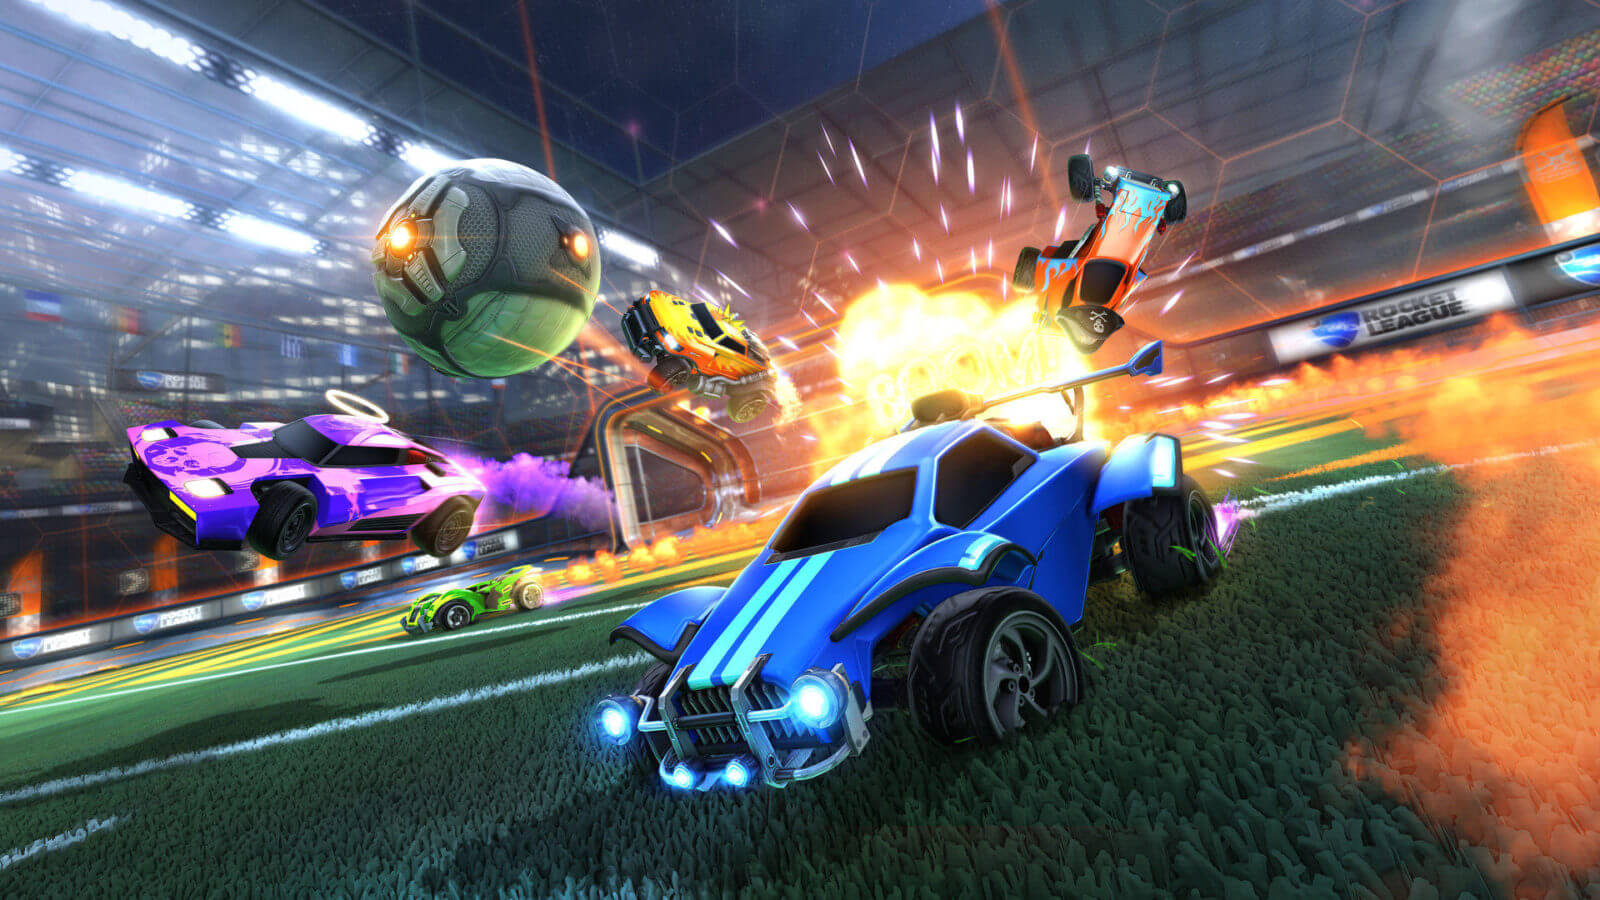 Find Out How to Get Free Credits in Rocket League